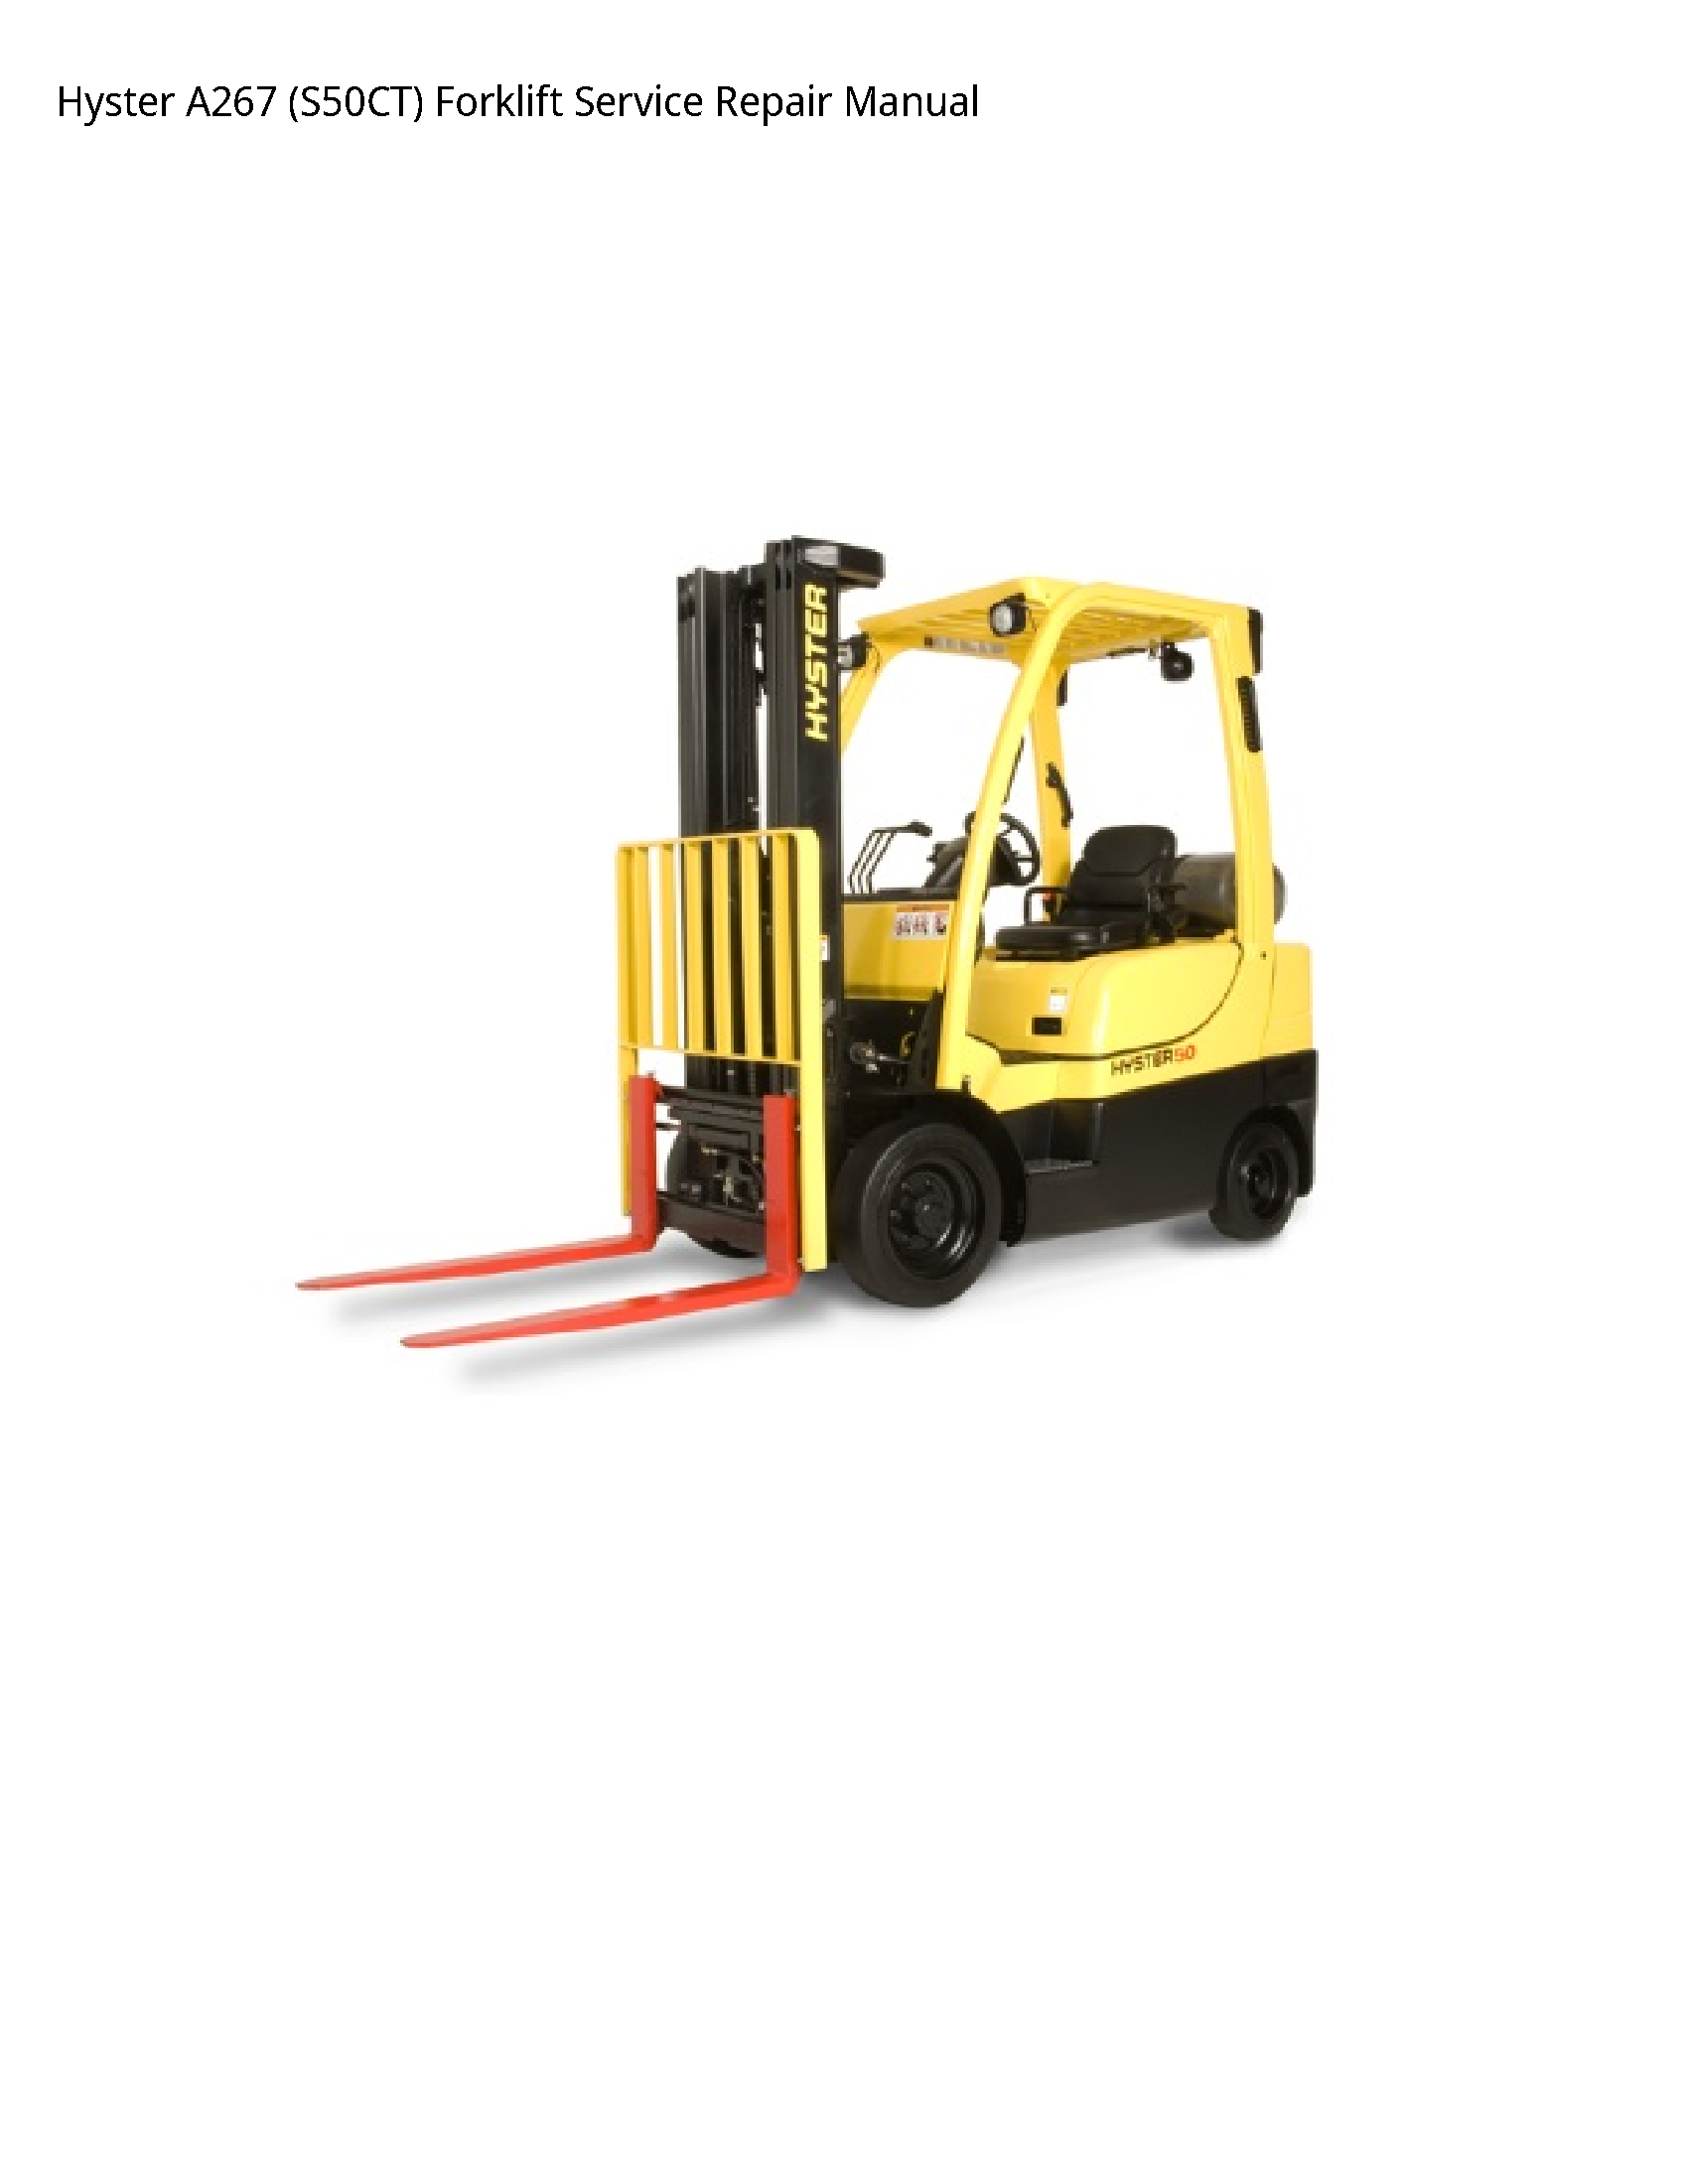 Hyster A267 Forklift manual